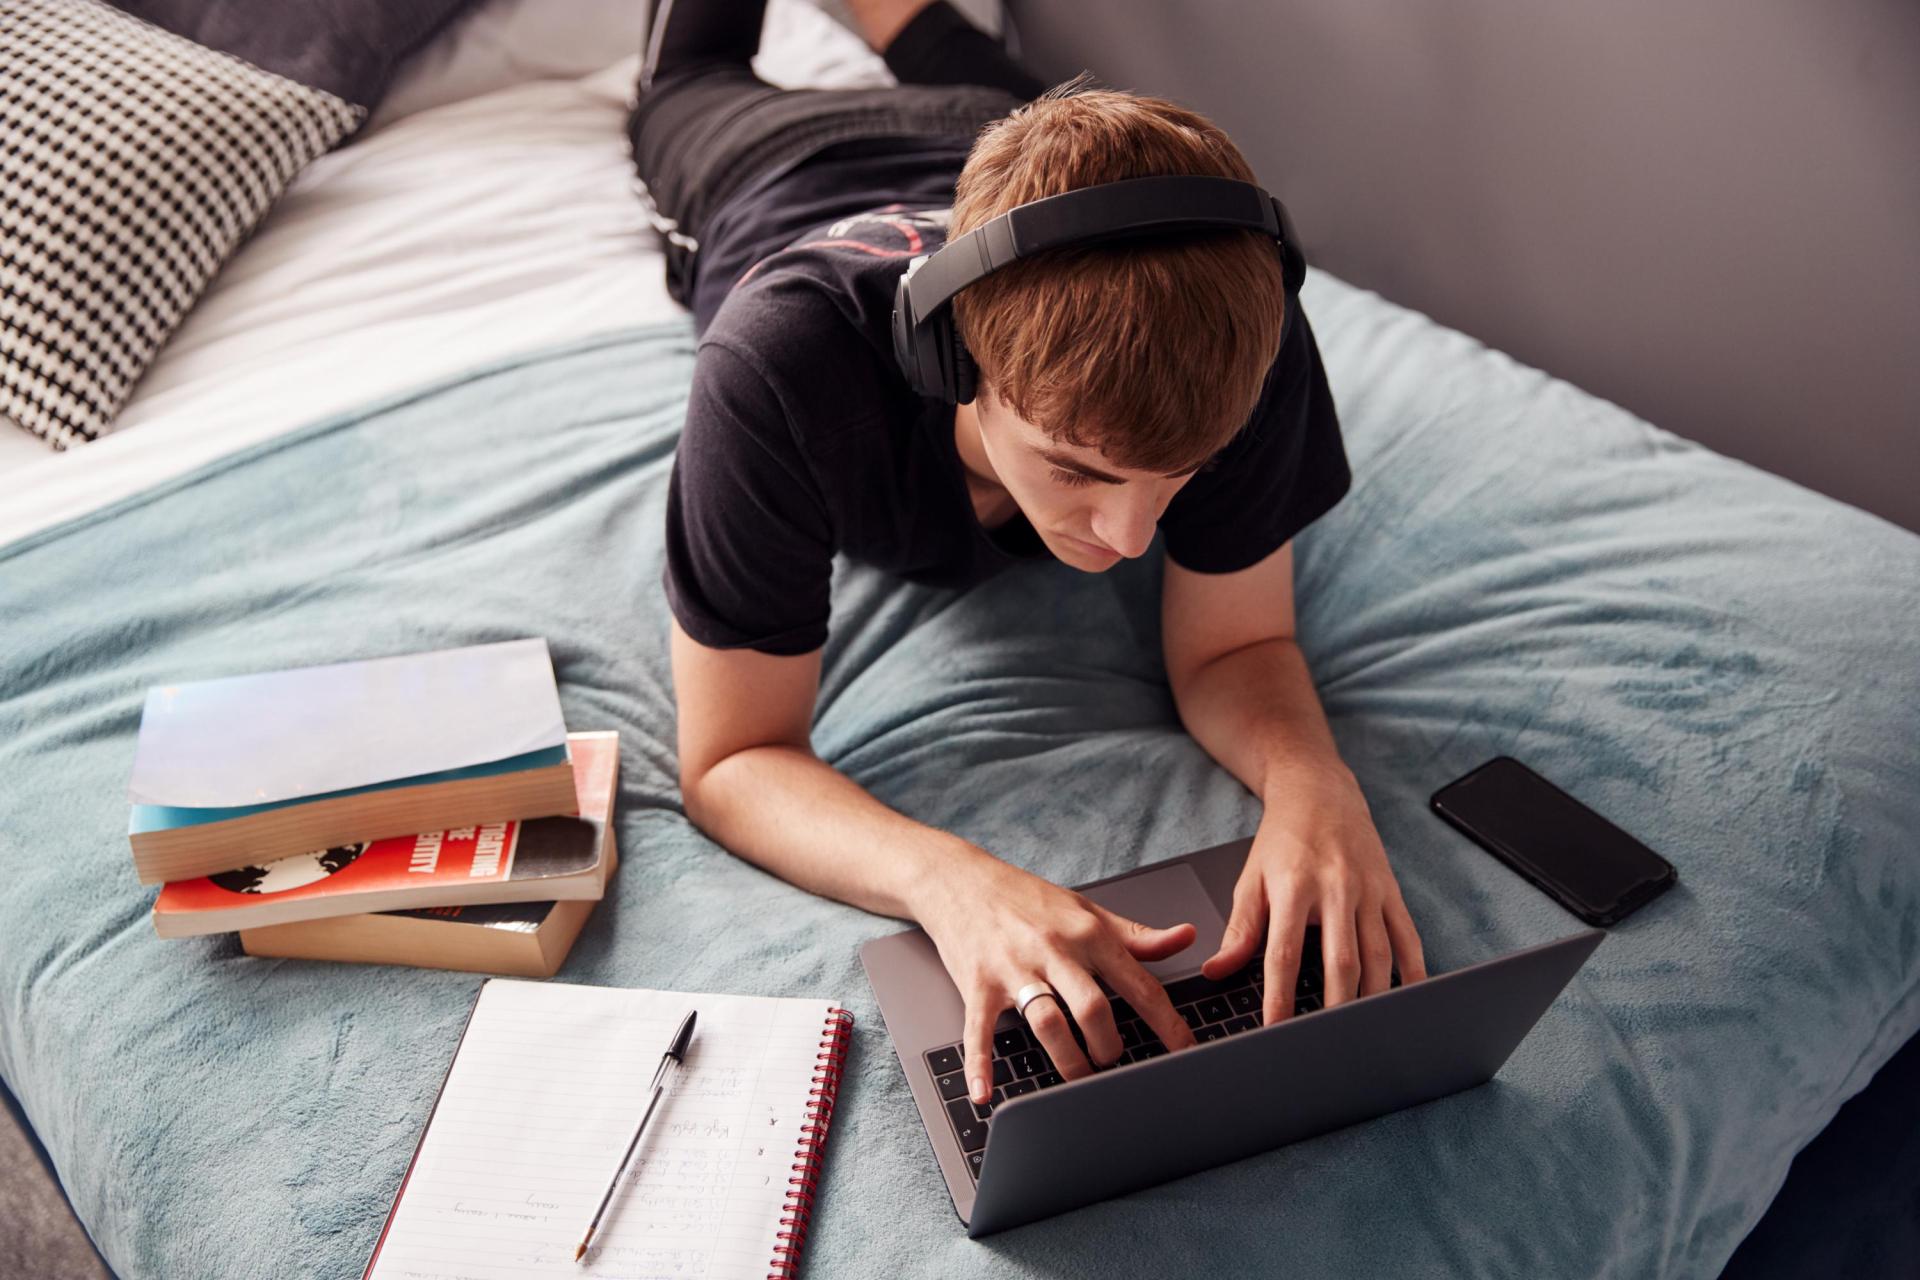 Male student lying on the bed at his laptop